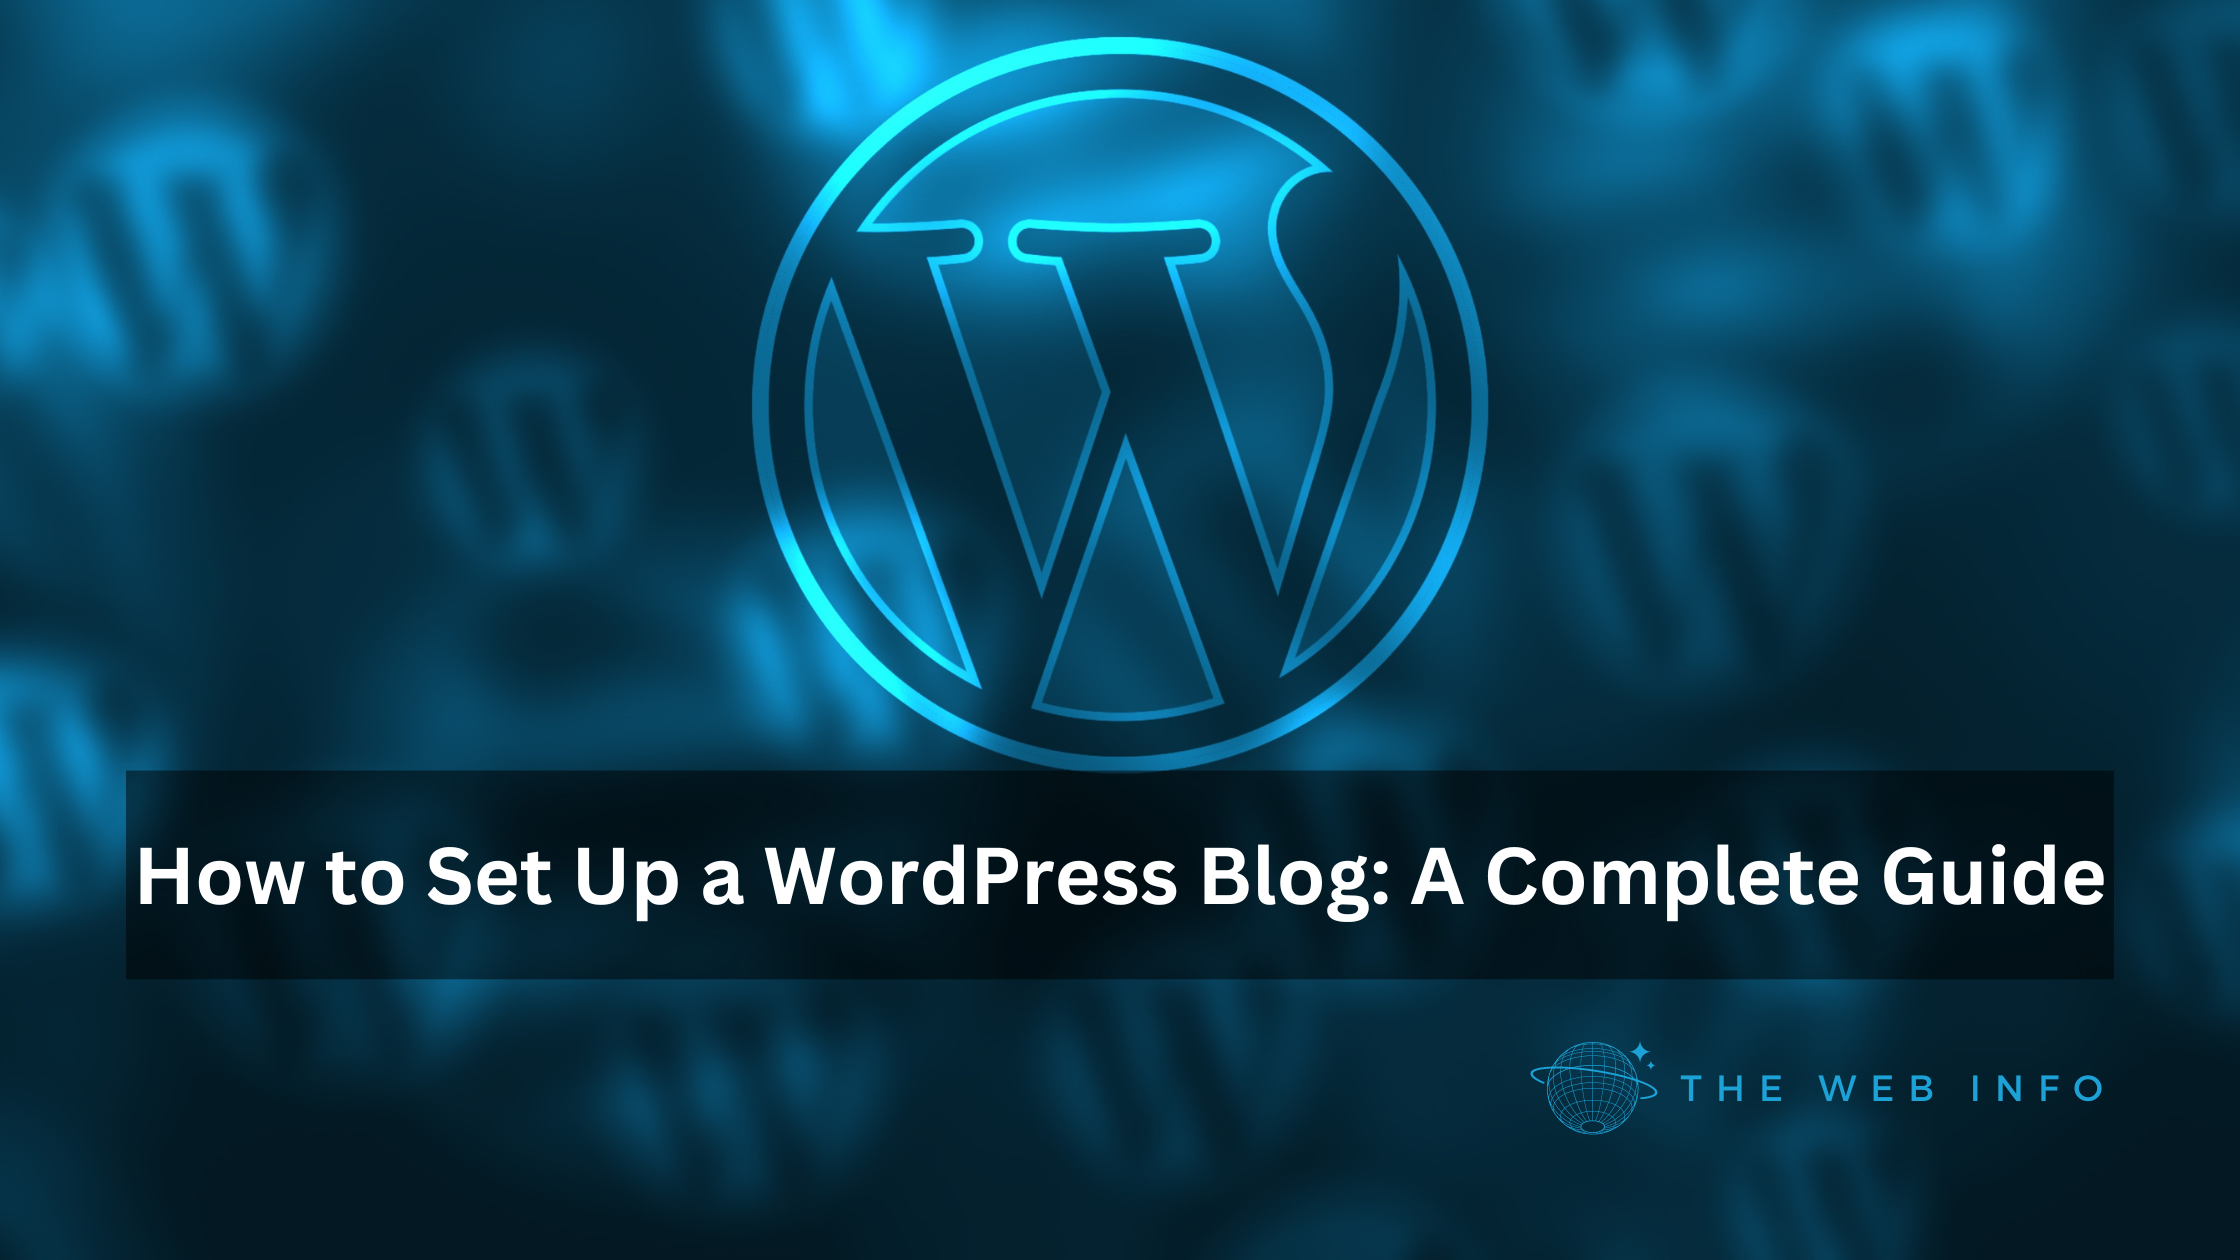 How to Set Up a WordPress Blog: A Complete Guide